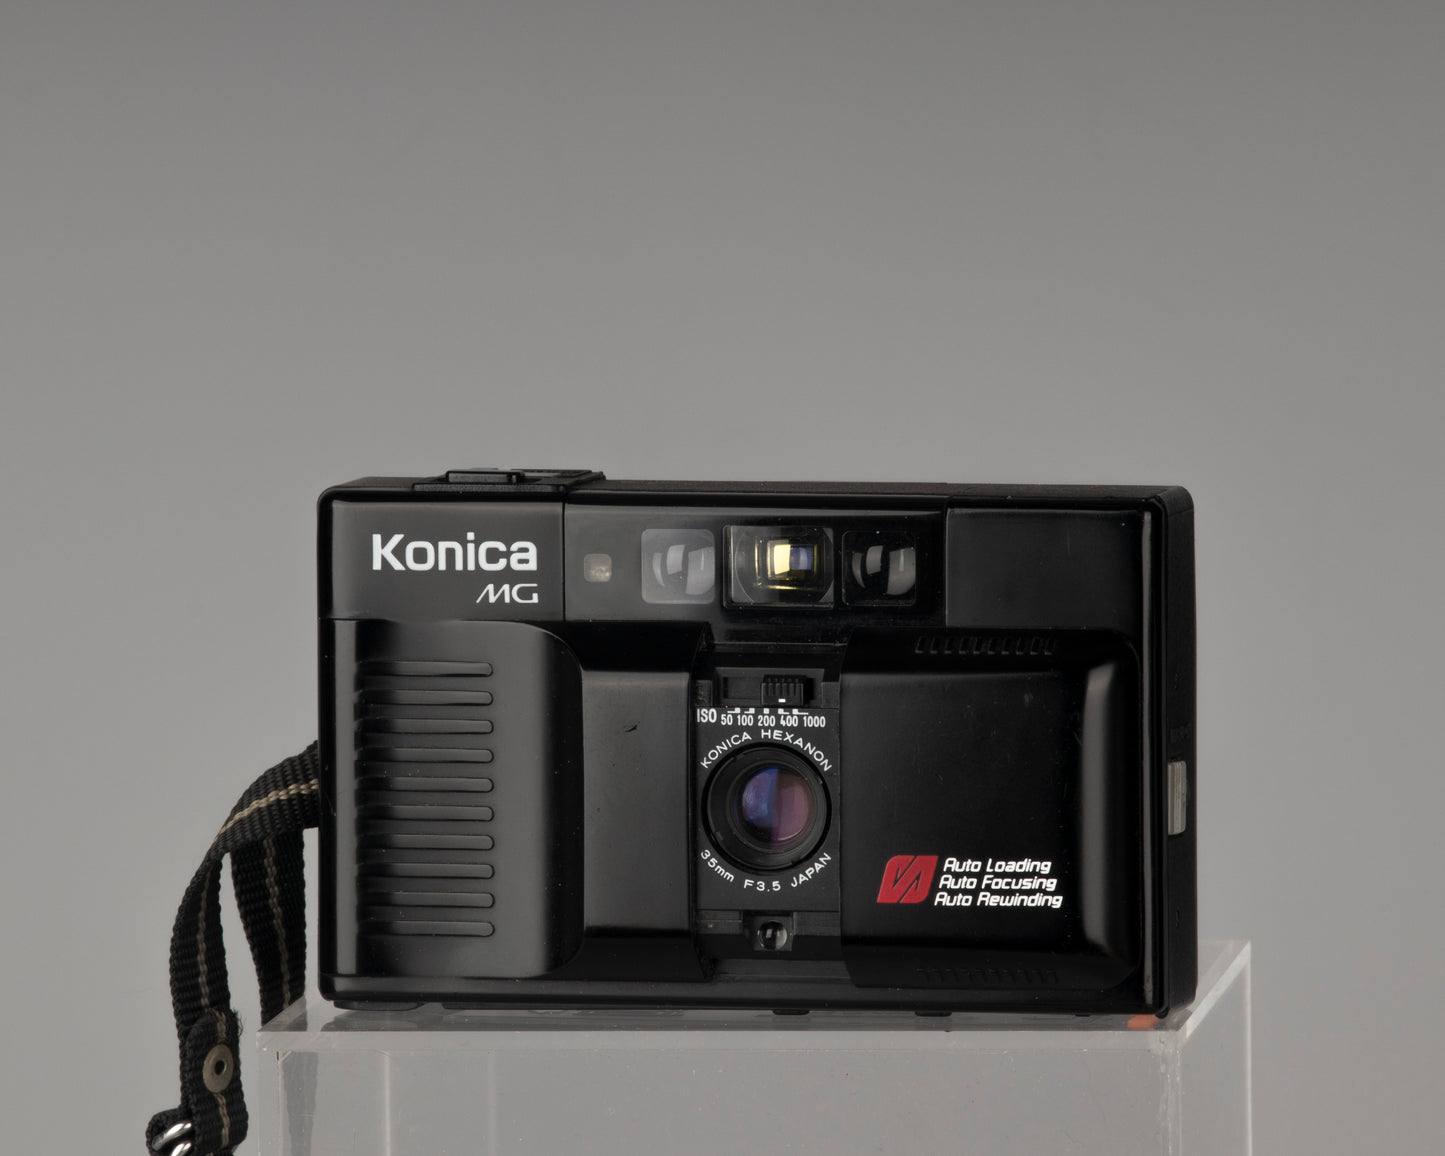 The Konica MG compact 35mm autofocus film camera from the 1980s,